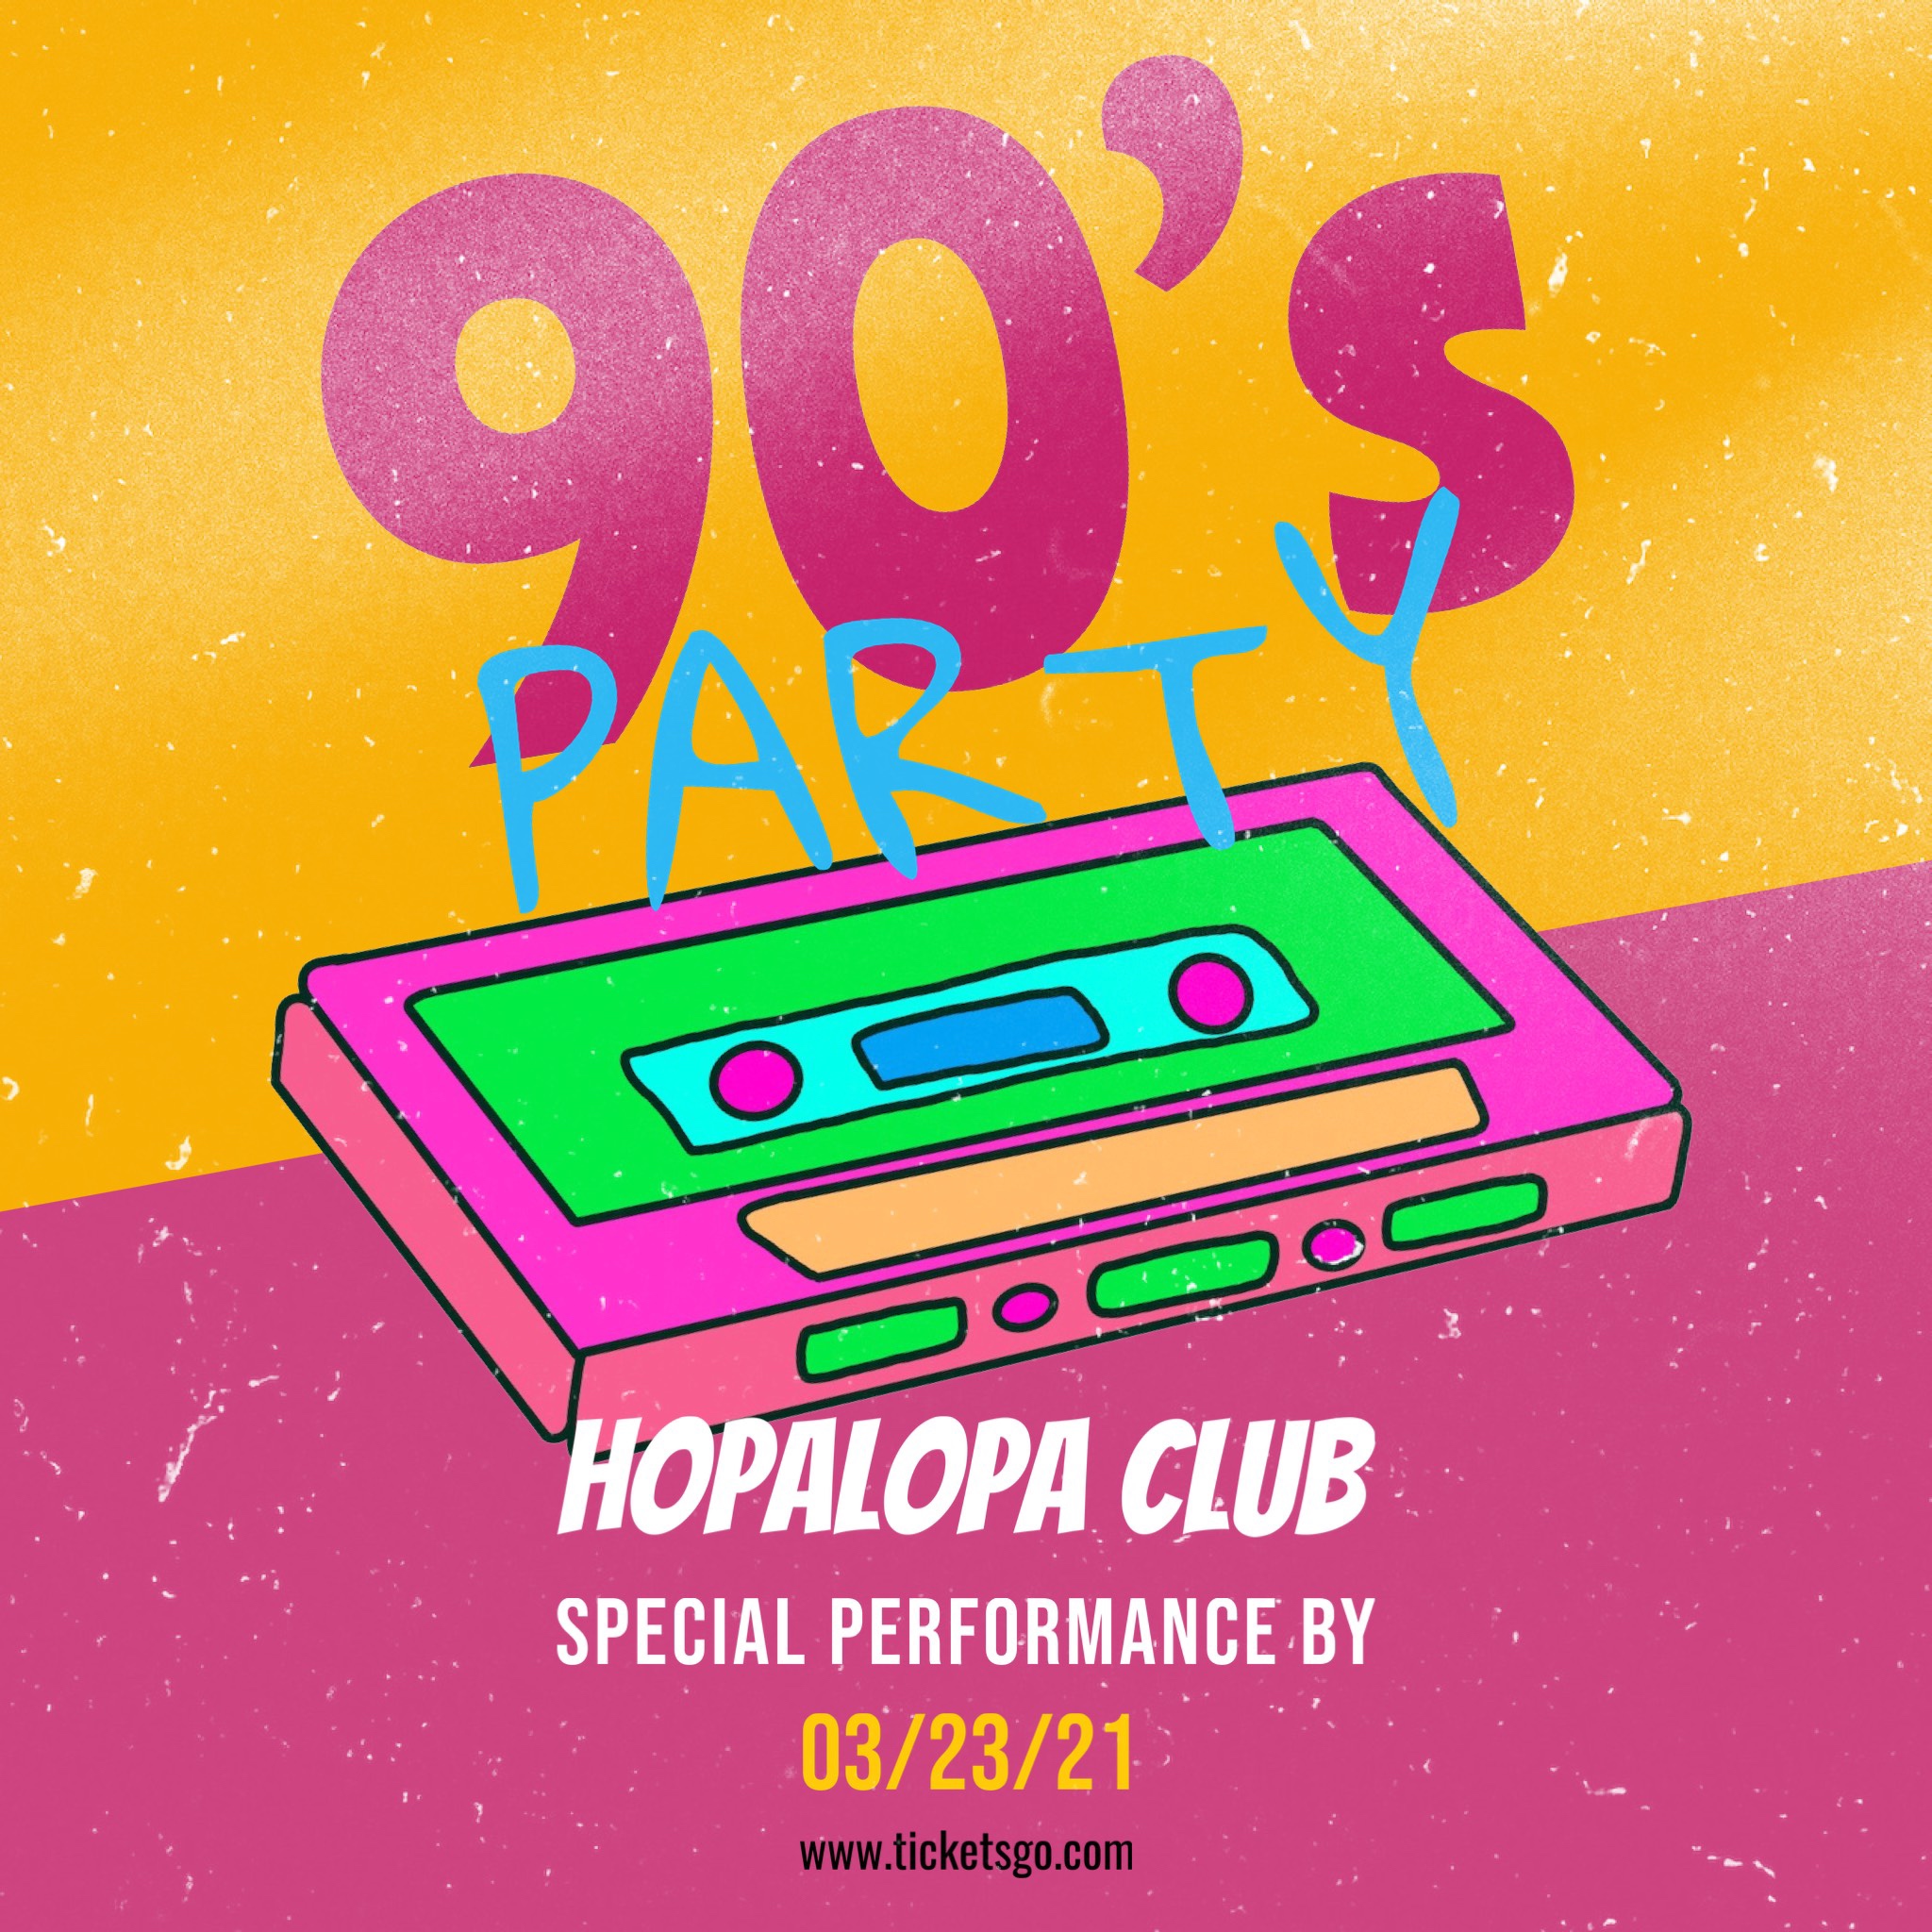 A Poster For A 90'S Party With A Boombox Music Template